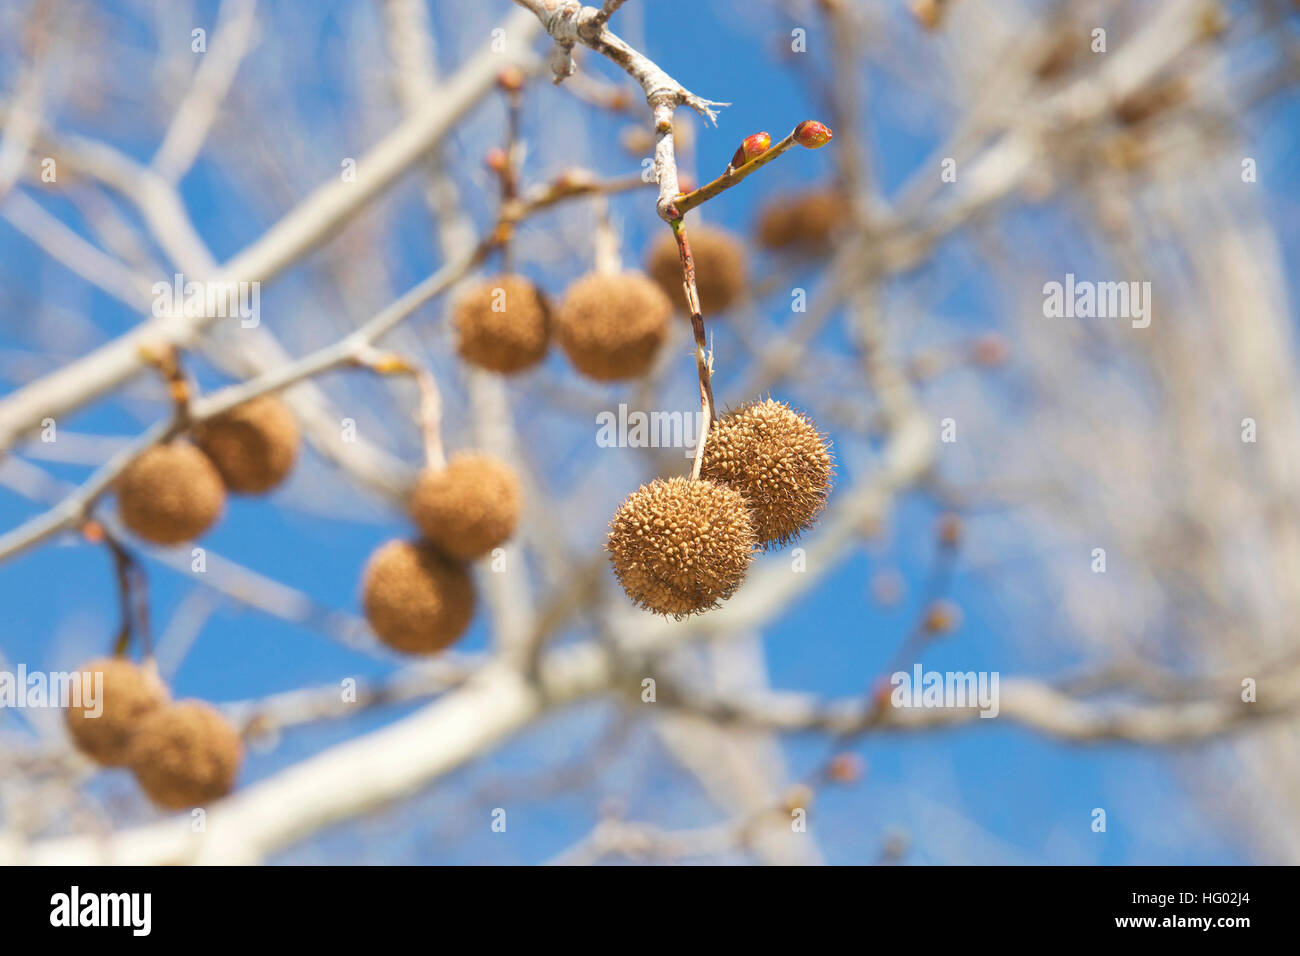 Seed pods for sycamore tree hanging from branch with blue sky background. Platanus occidentalis, also known as American sycamore, American planetree, Stock Photo